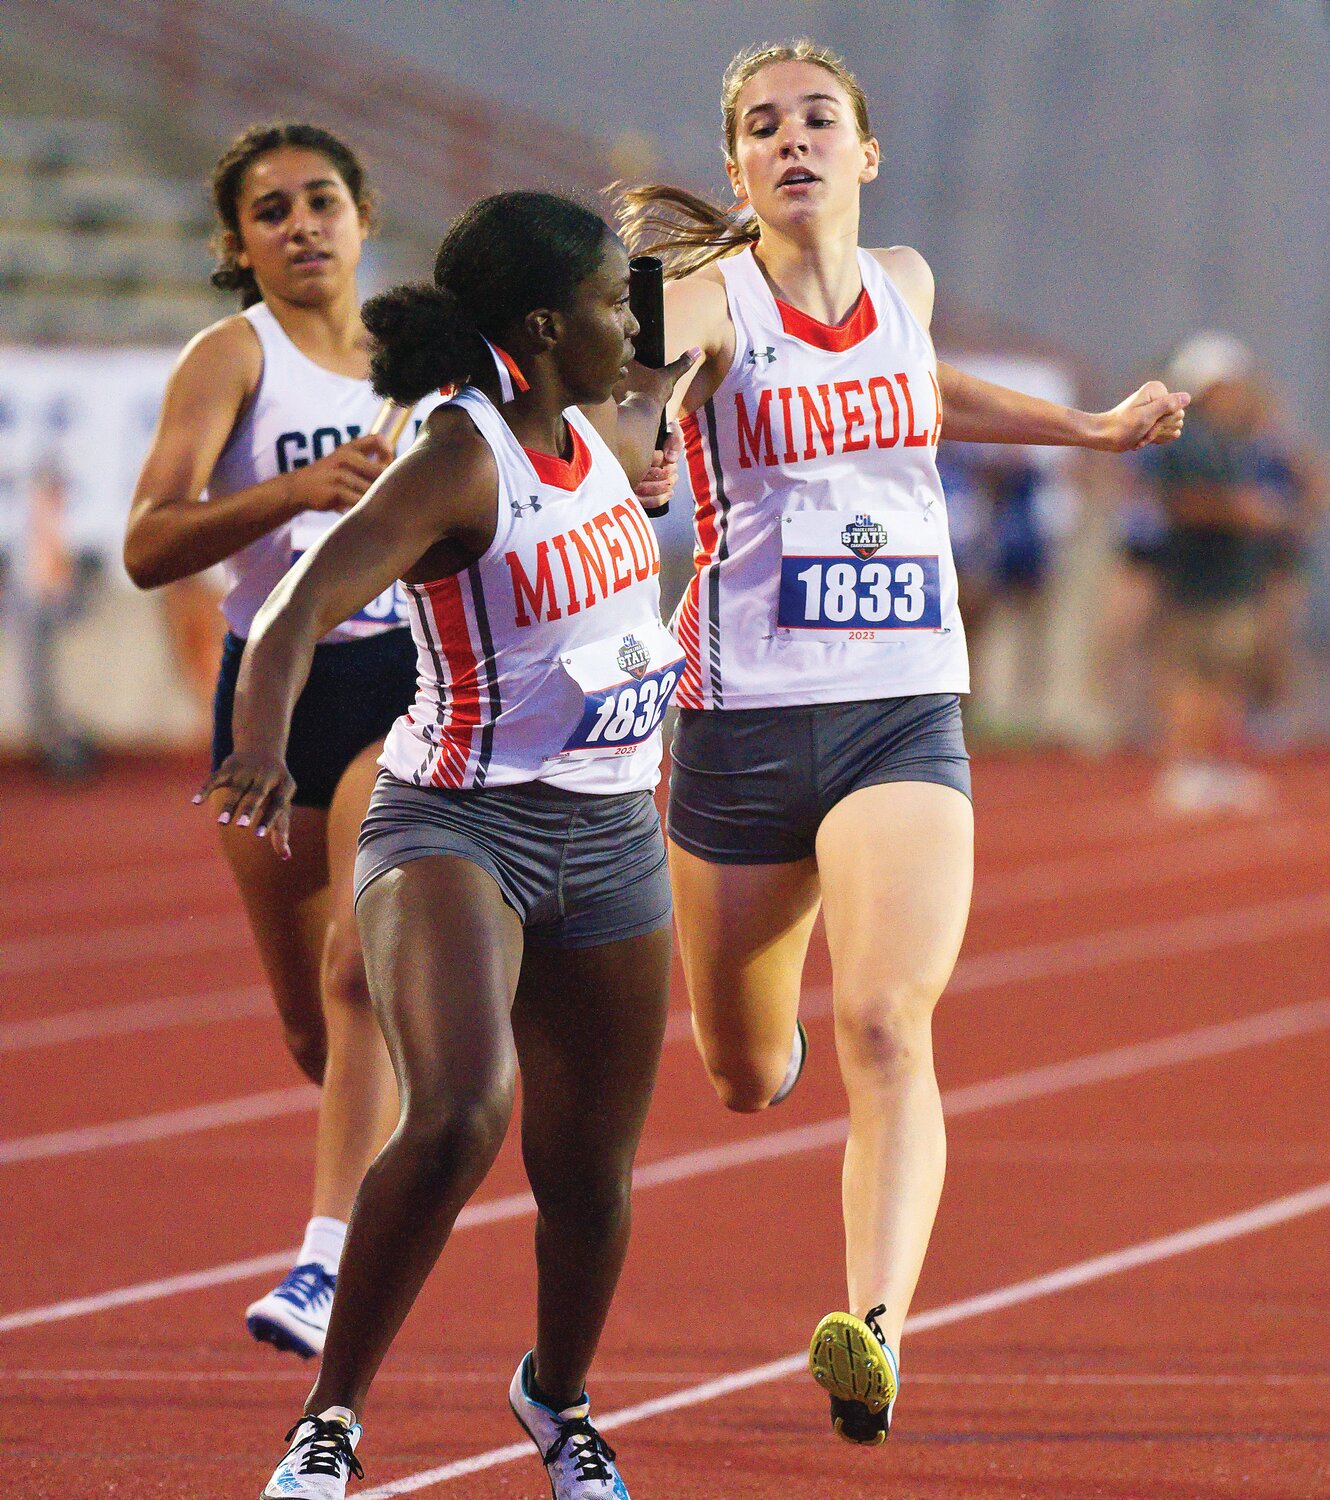 Shylah Kratzmeyer receives the baton from Raylie Peebles for the second leg of the 4x400-meter relay at the state track meet in Austin. [view more relay running]